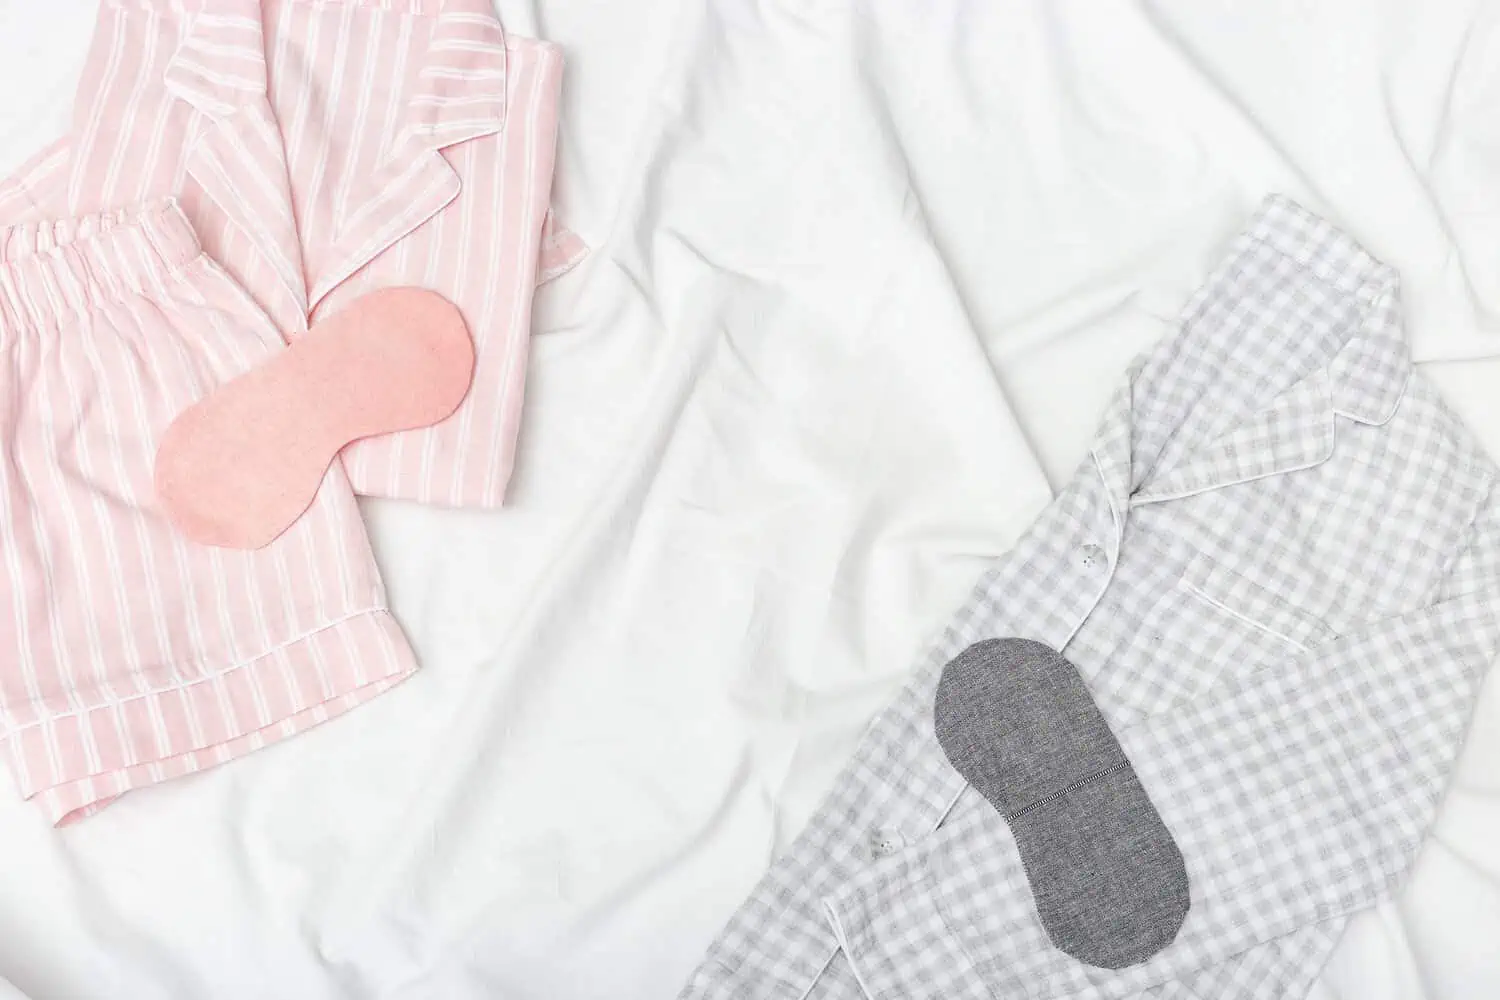 Pink and grey sleepwear on the bed